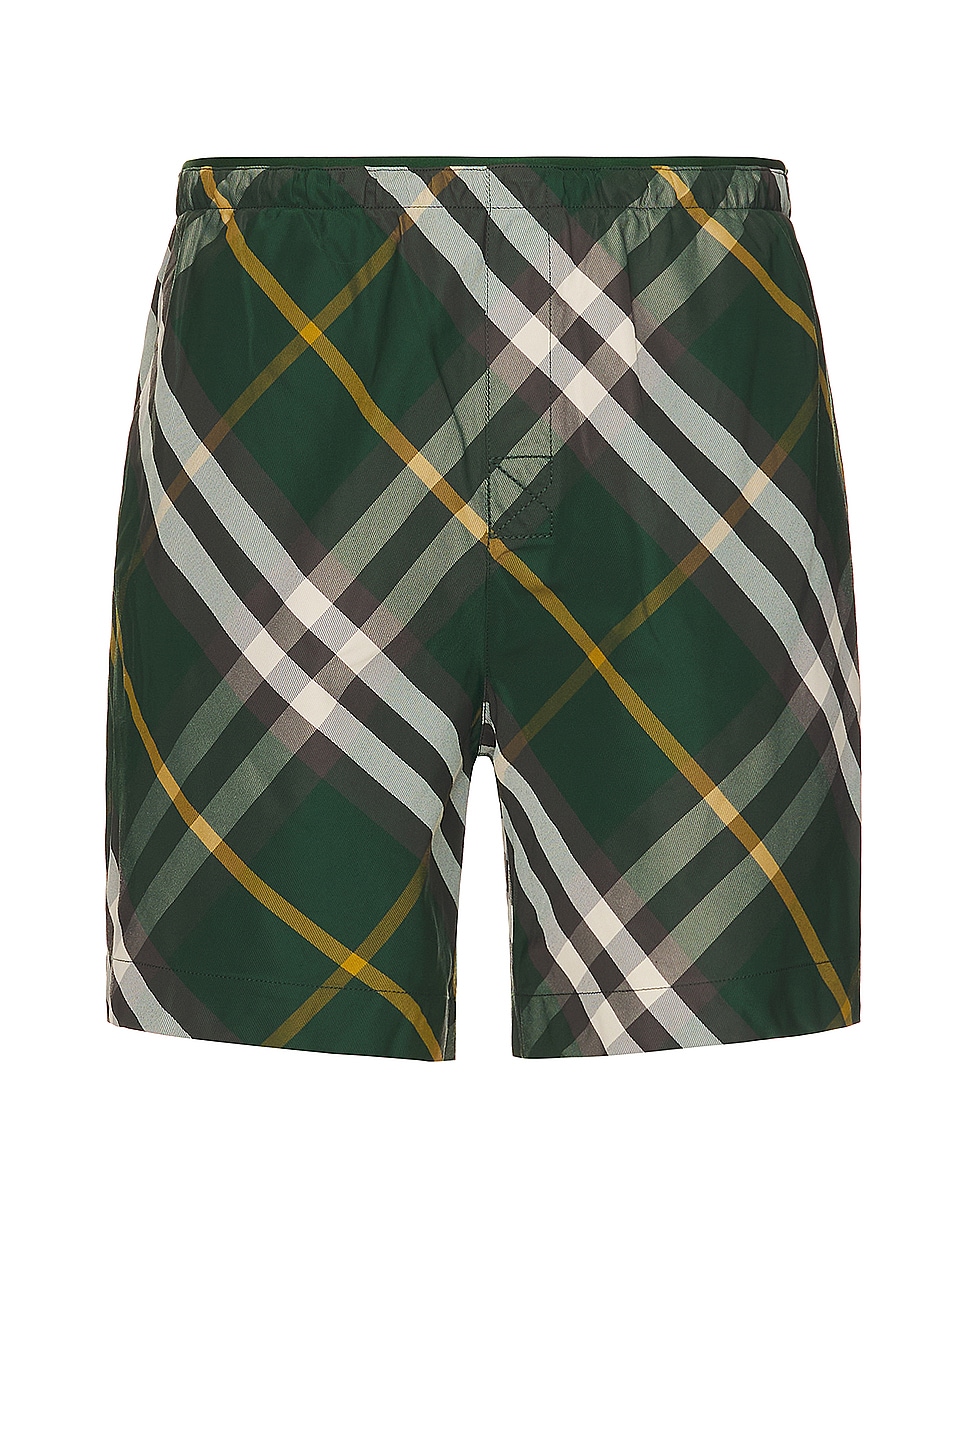 Image 1 of Burberry Check Pattern Short in Ivy Ip Check